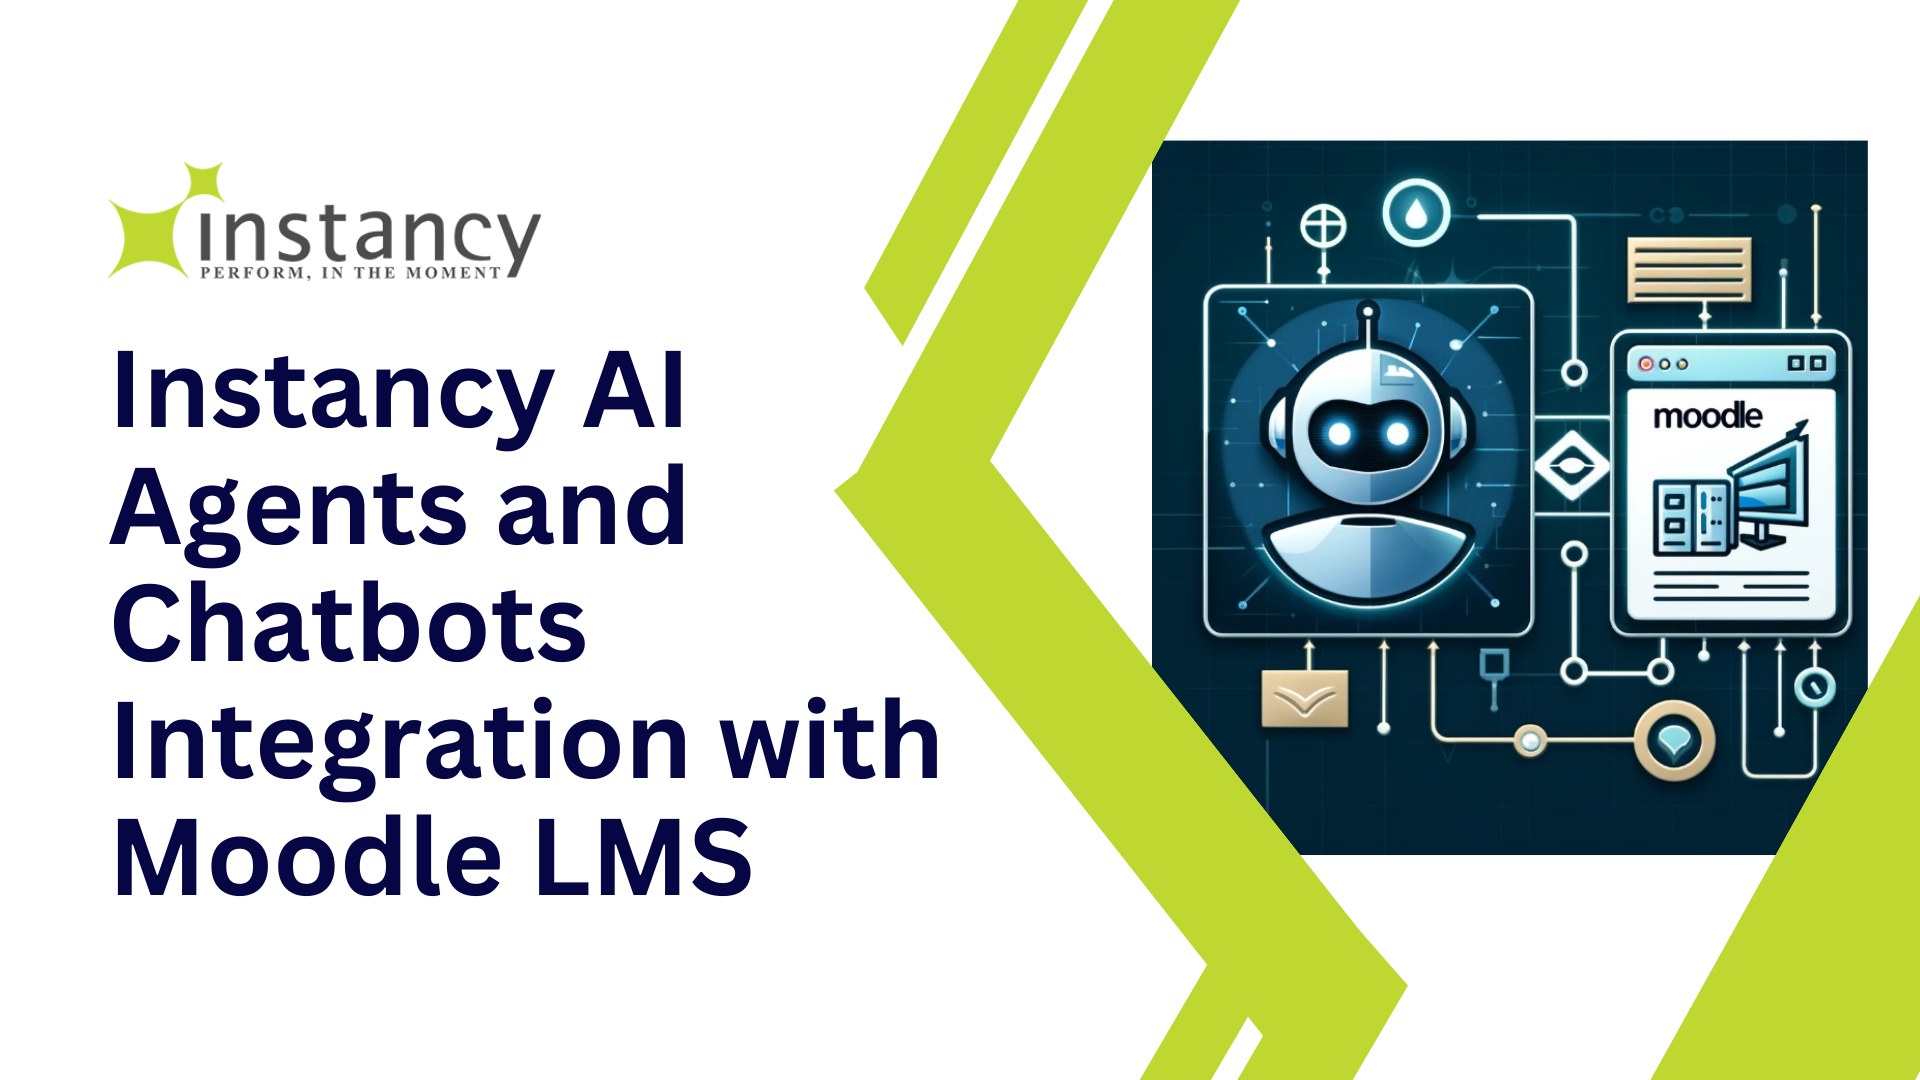 Instancy Chatbots Integration with Moodle LMS